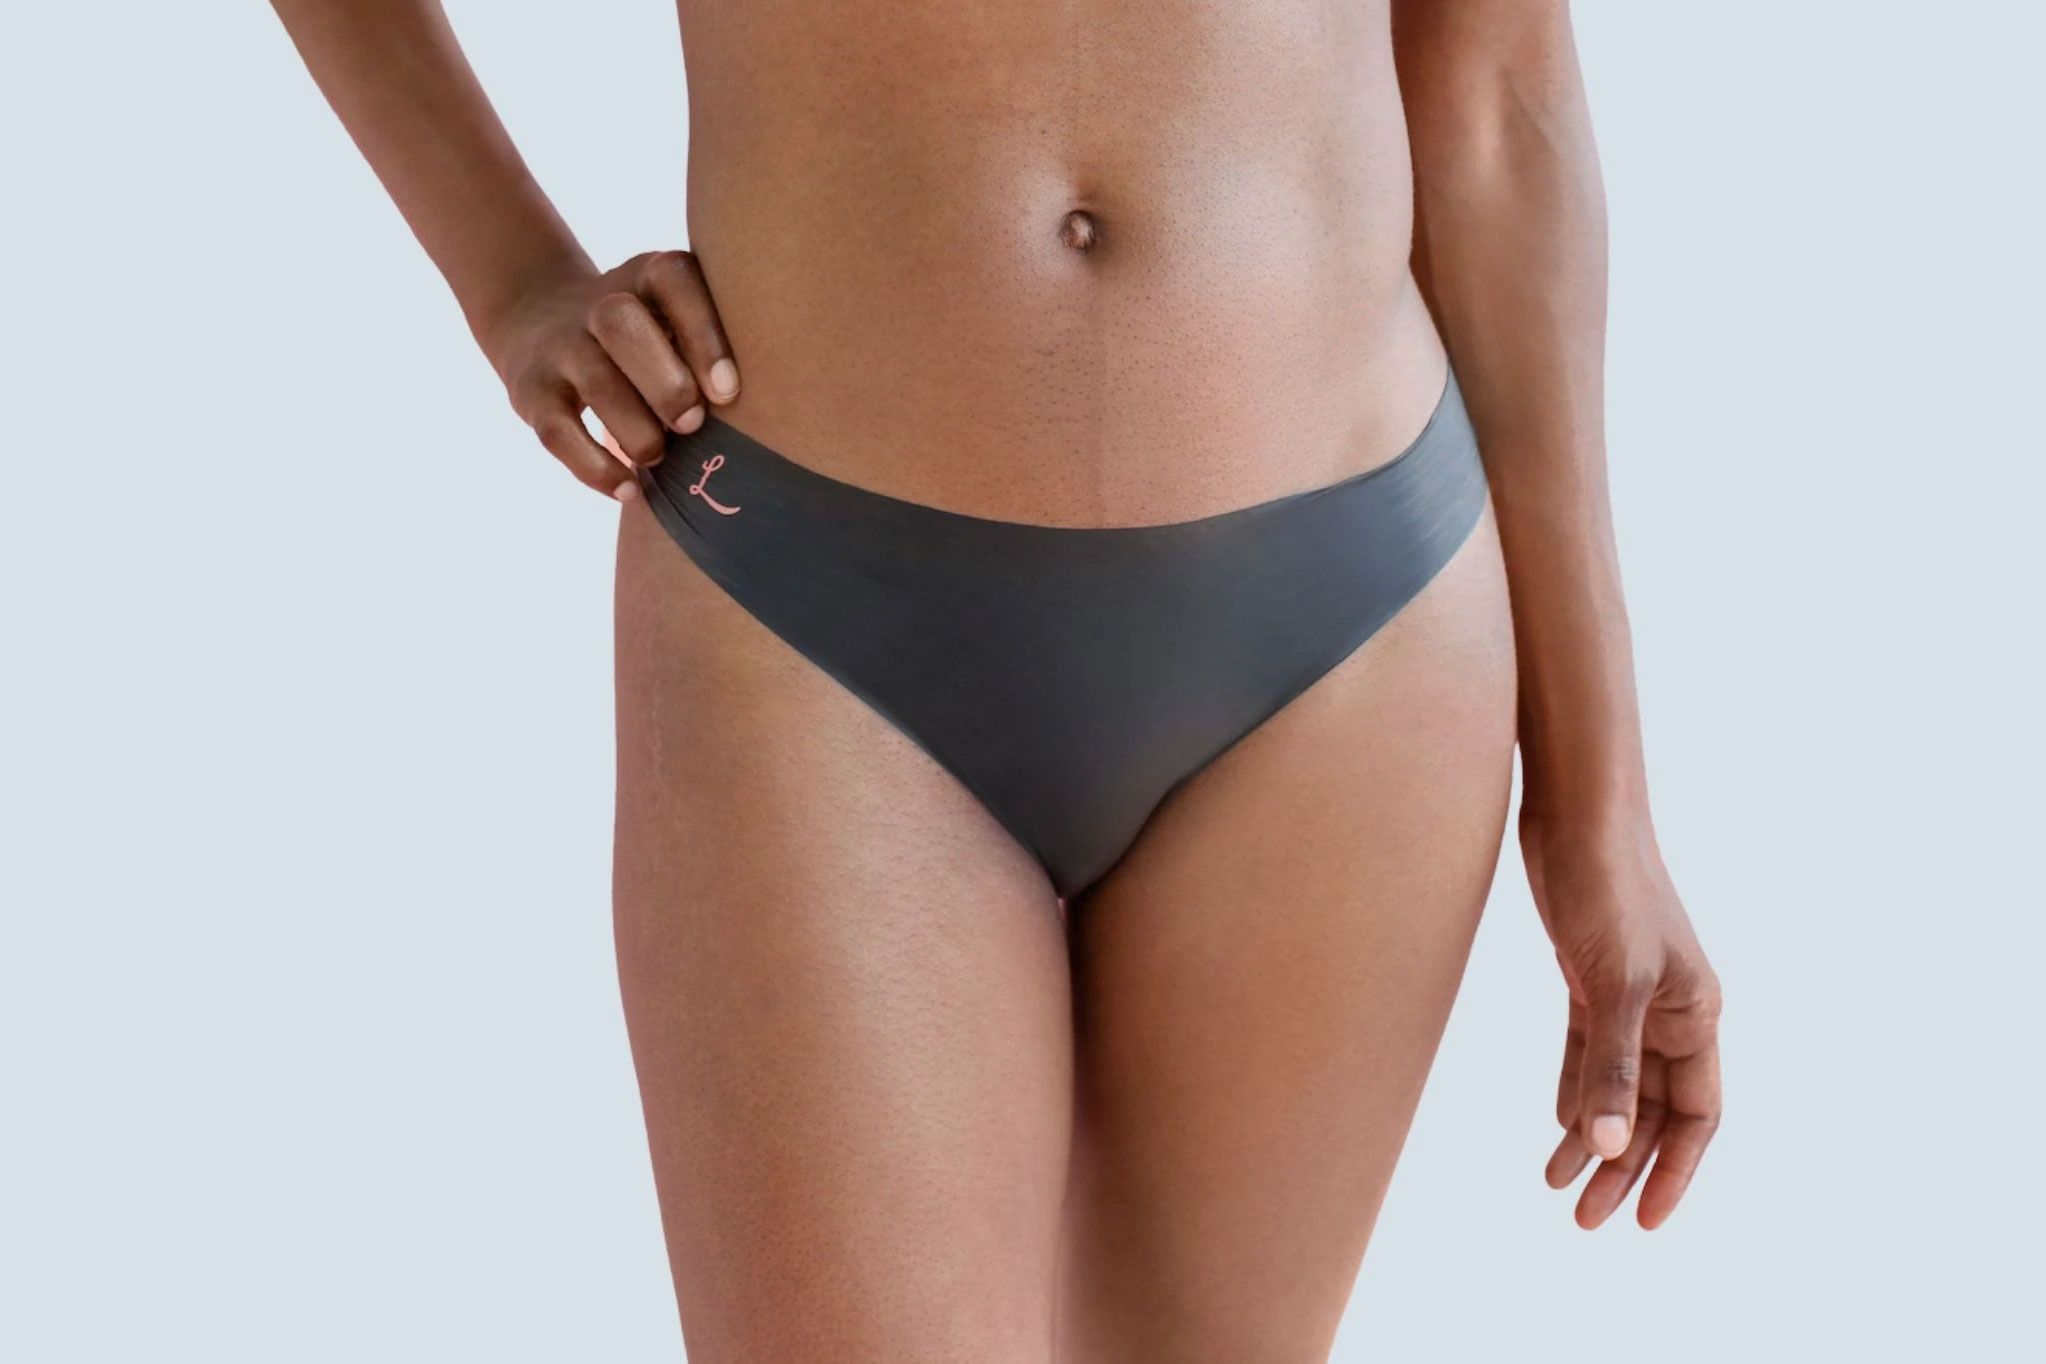 This Underwear Is FDA-Cleared for Oral picture image